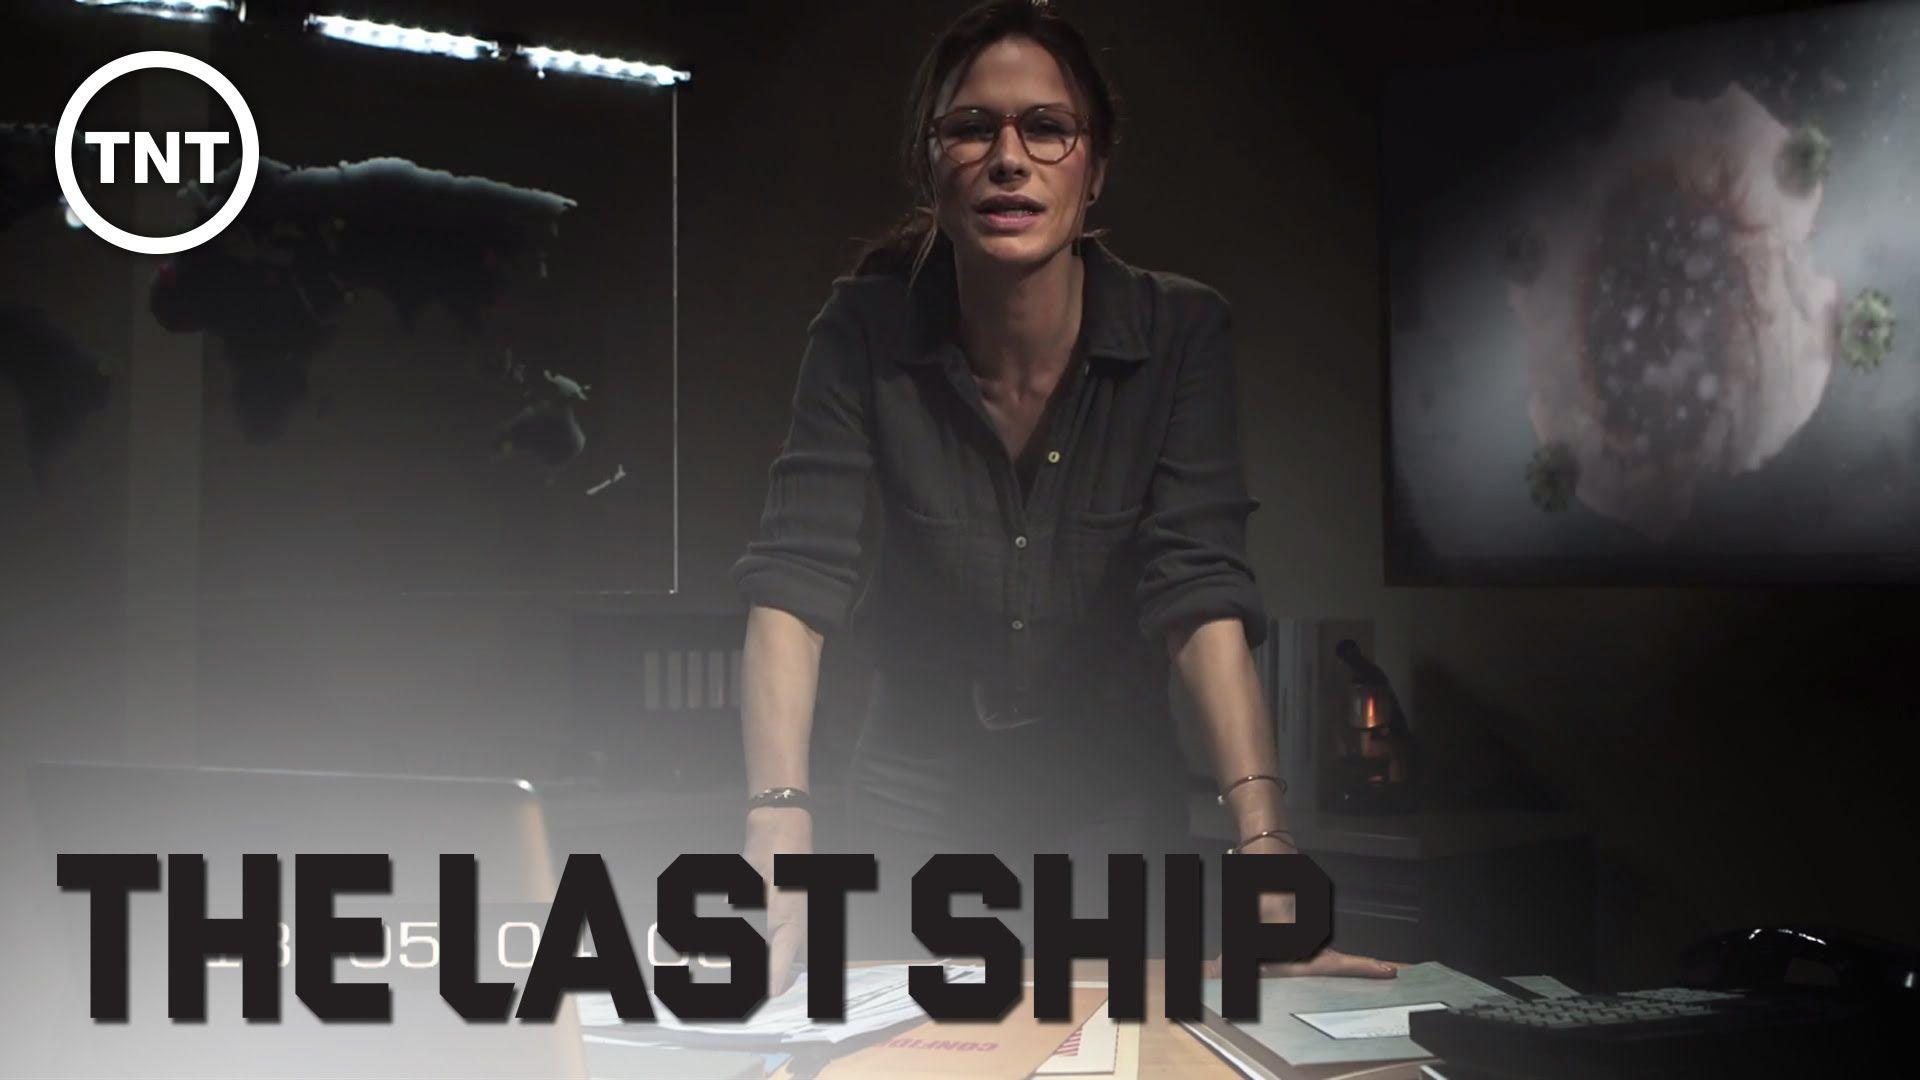 The Last Ship Full HD Wallpaper and Background Imagex1080